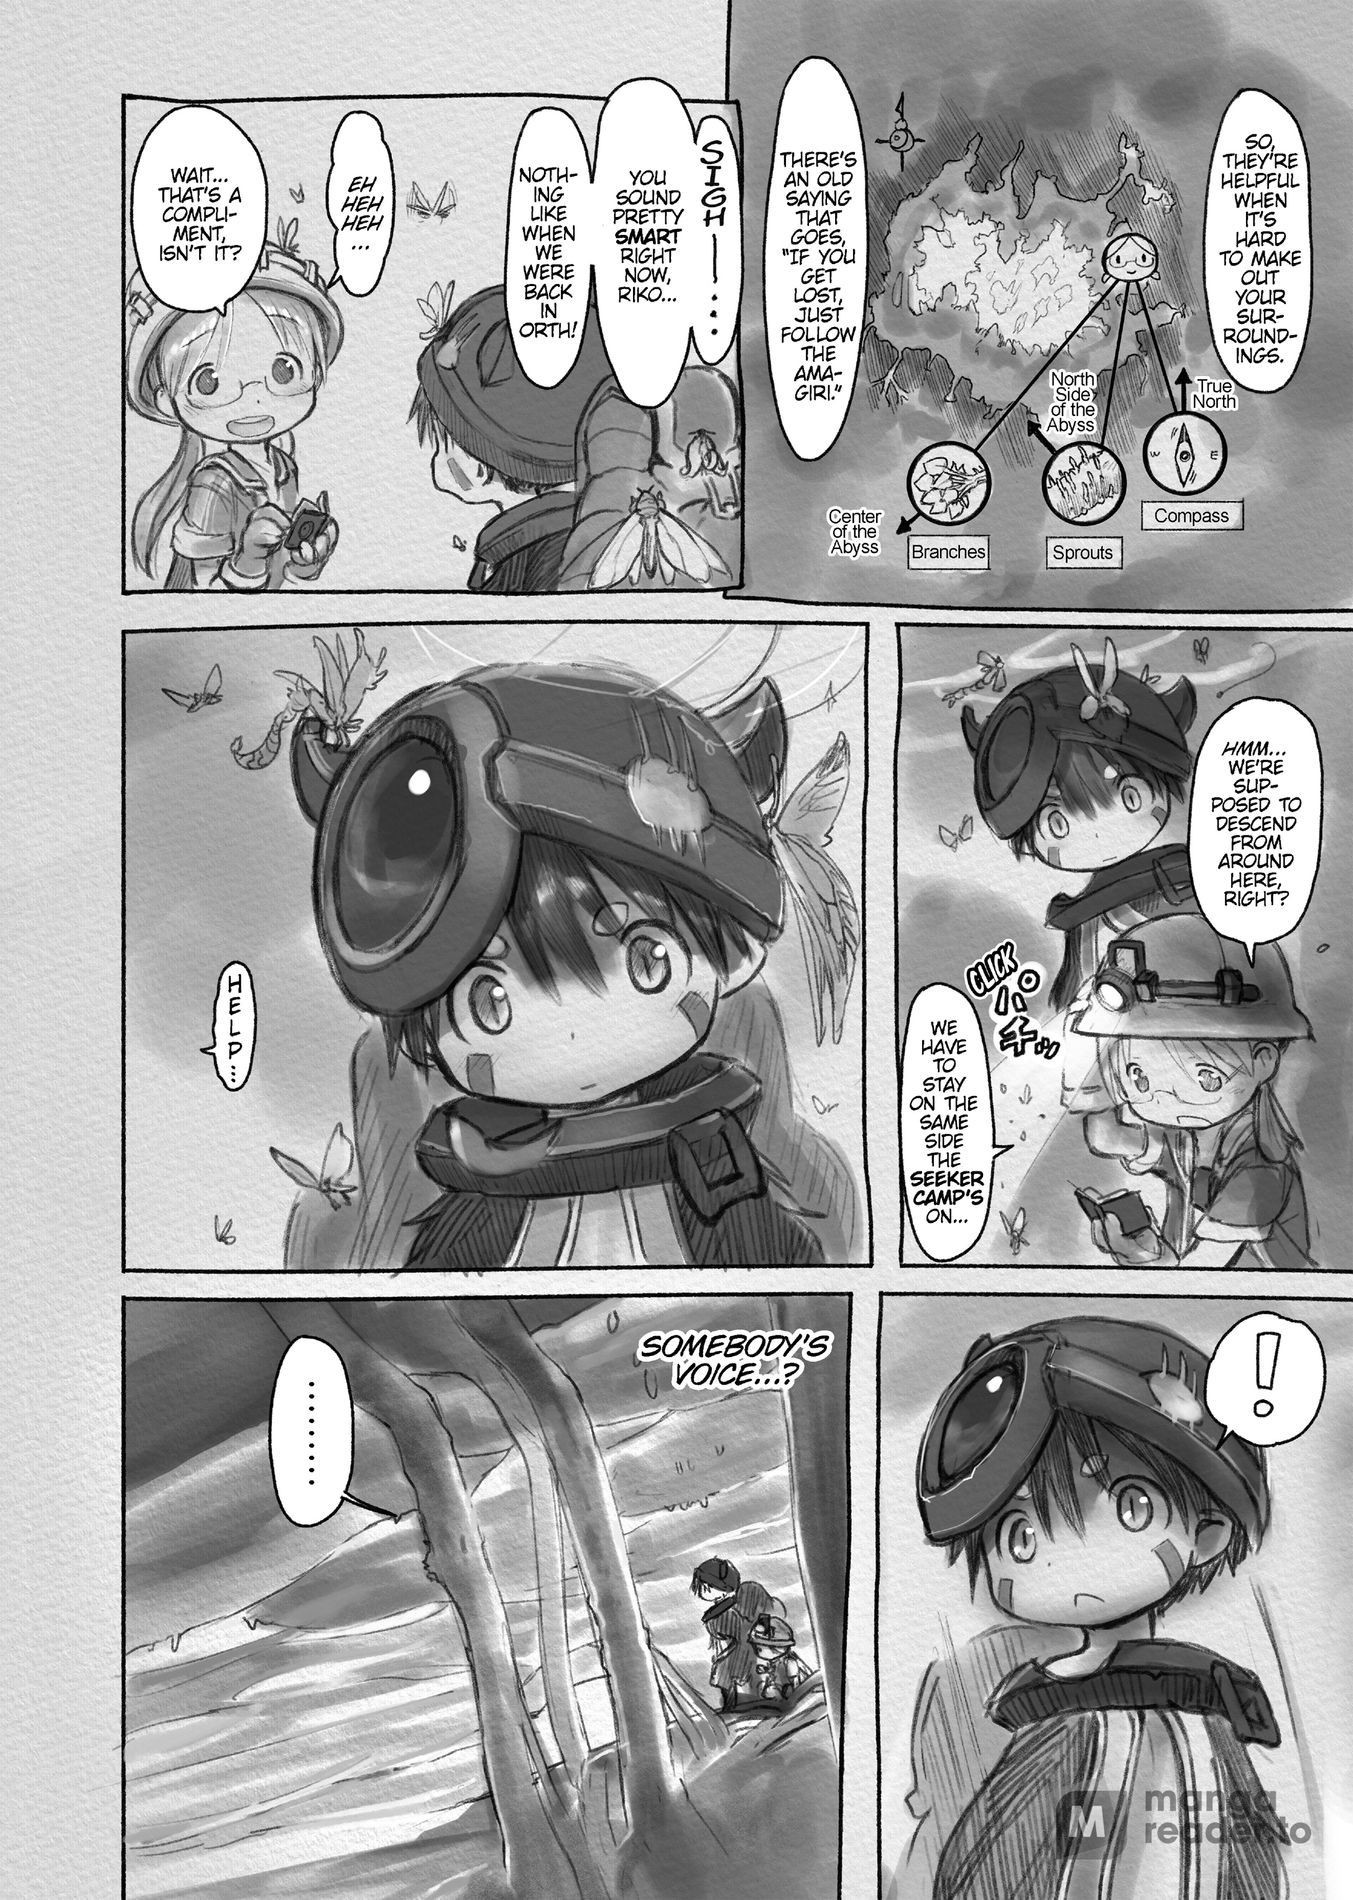 Made In Abyss - Chapter 10 - Made in Abyss Manga Online